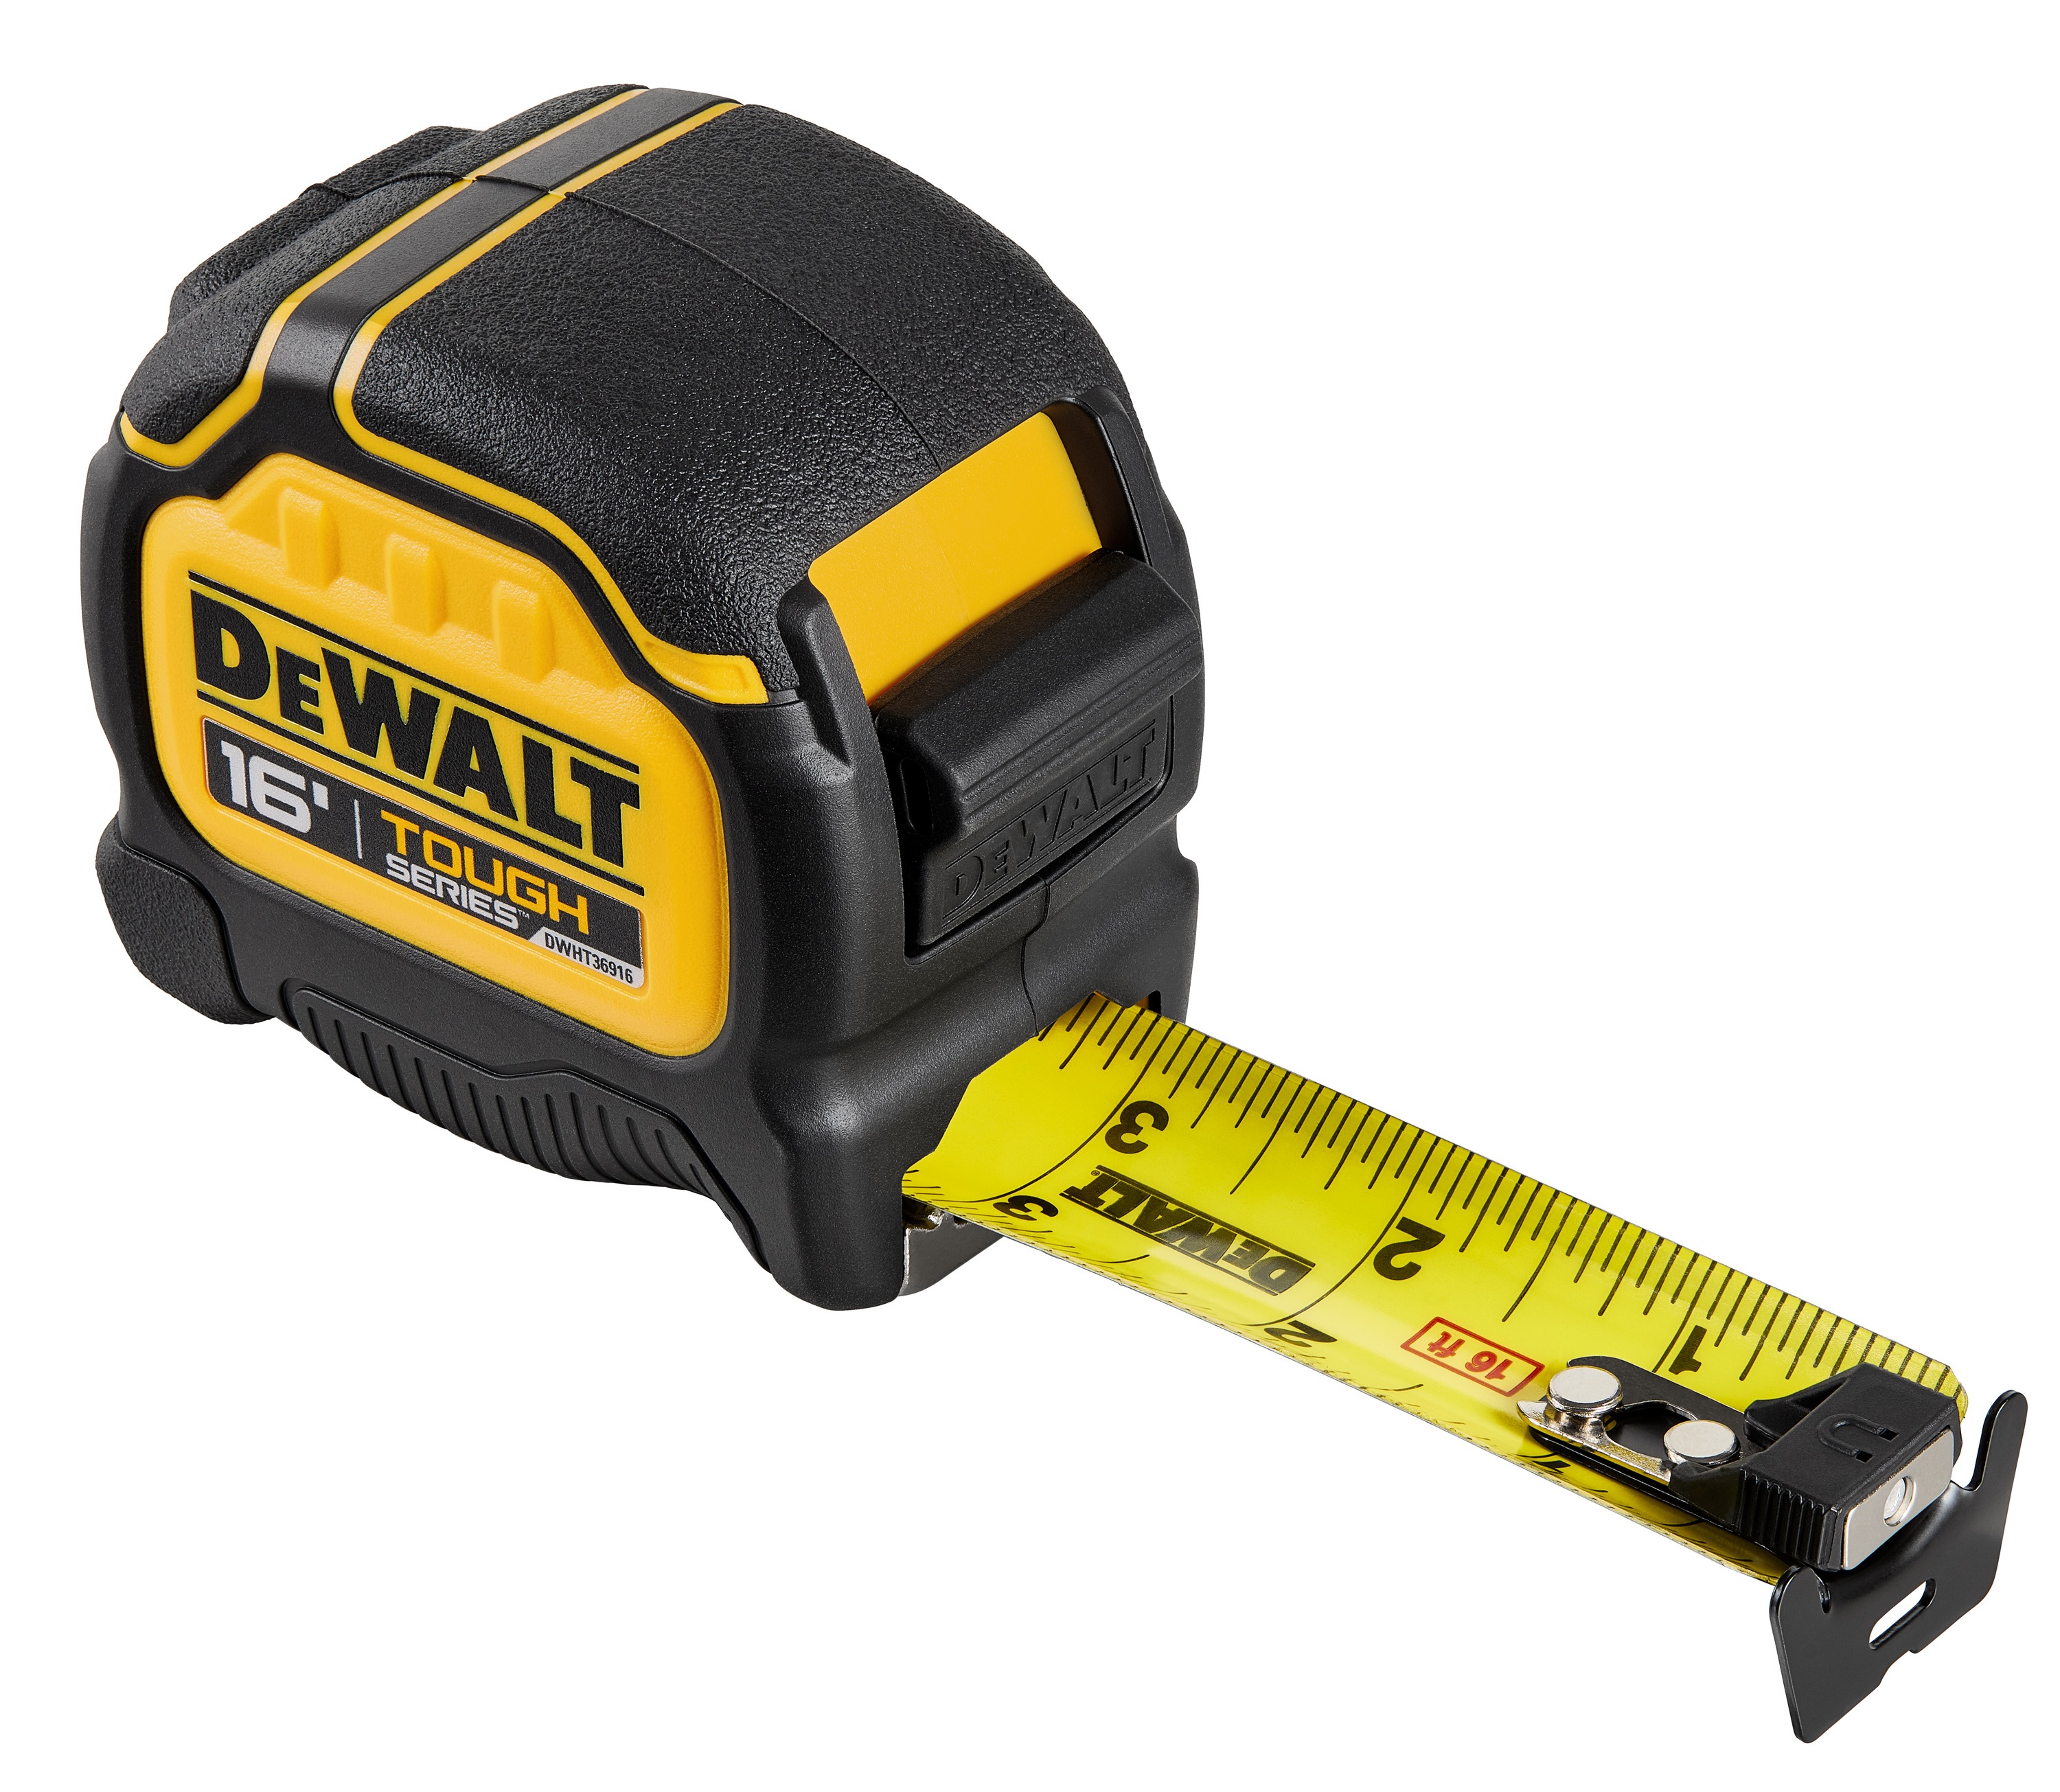 Profile of Tough Series 16 feet Tape Measure with blade pulled out. 